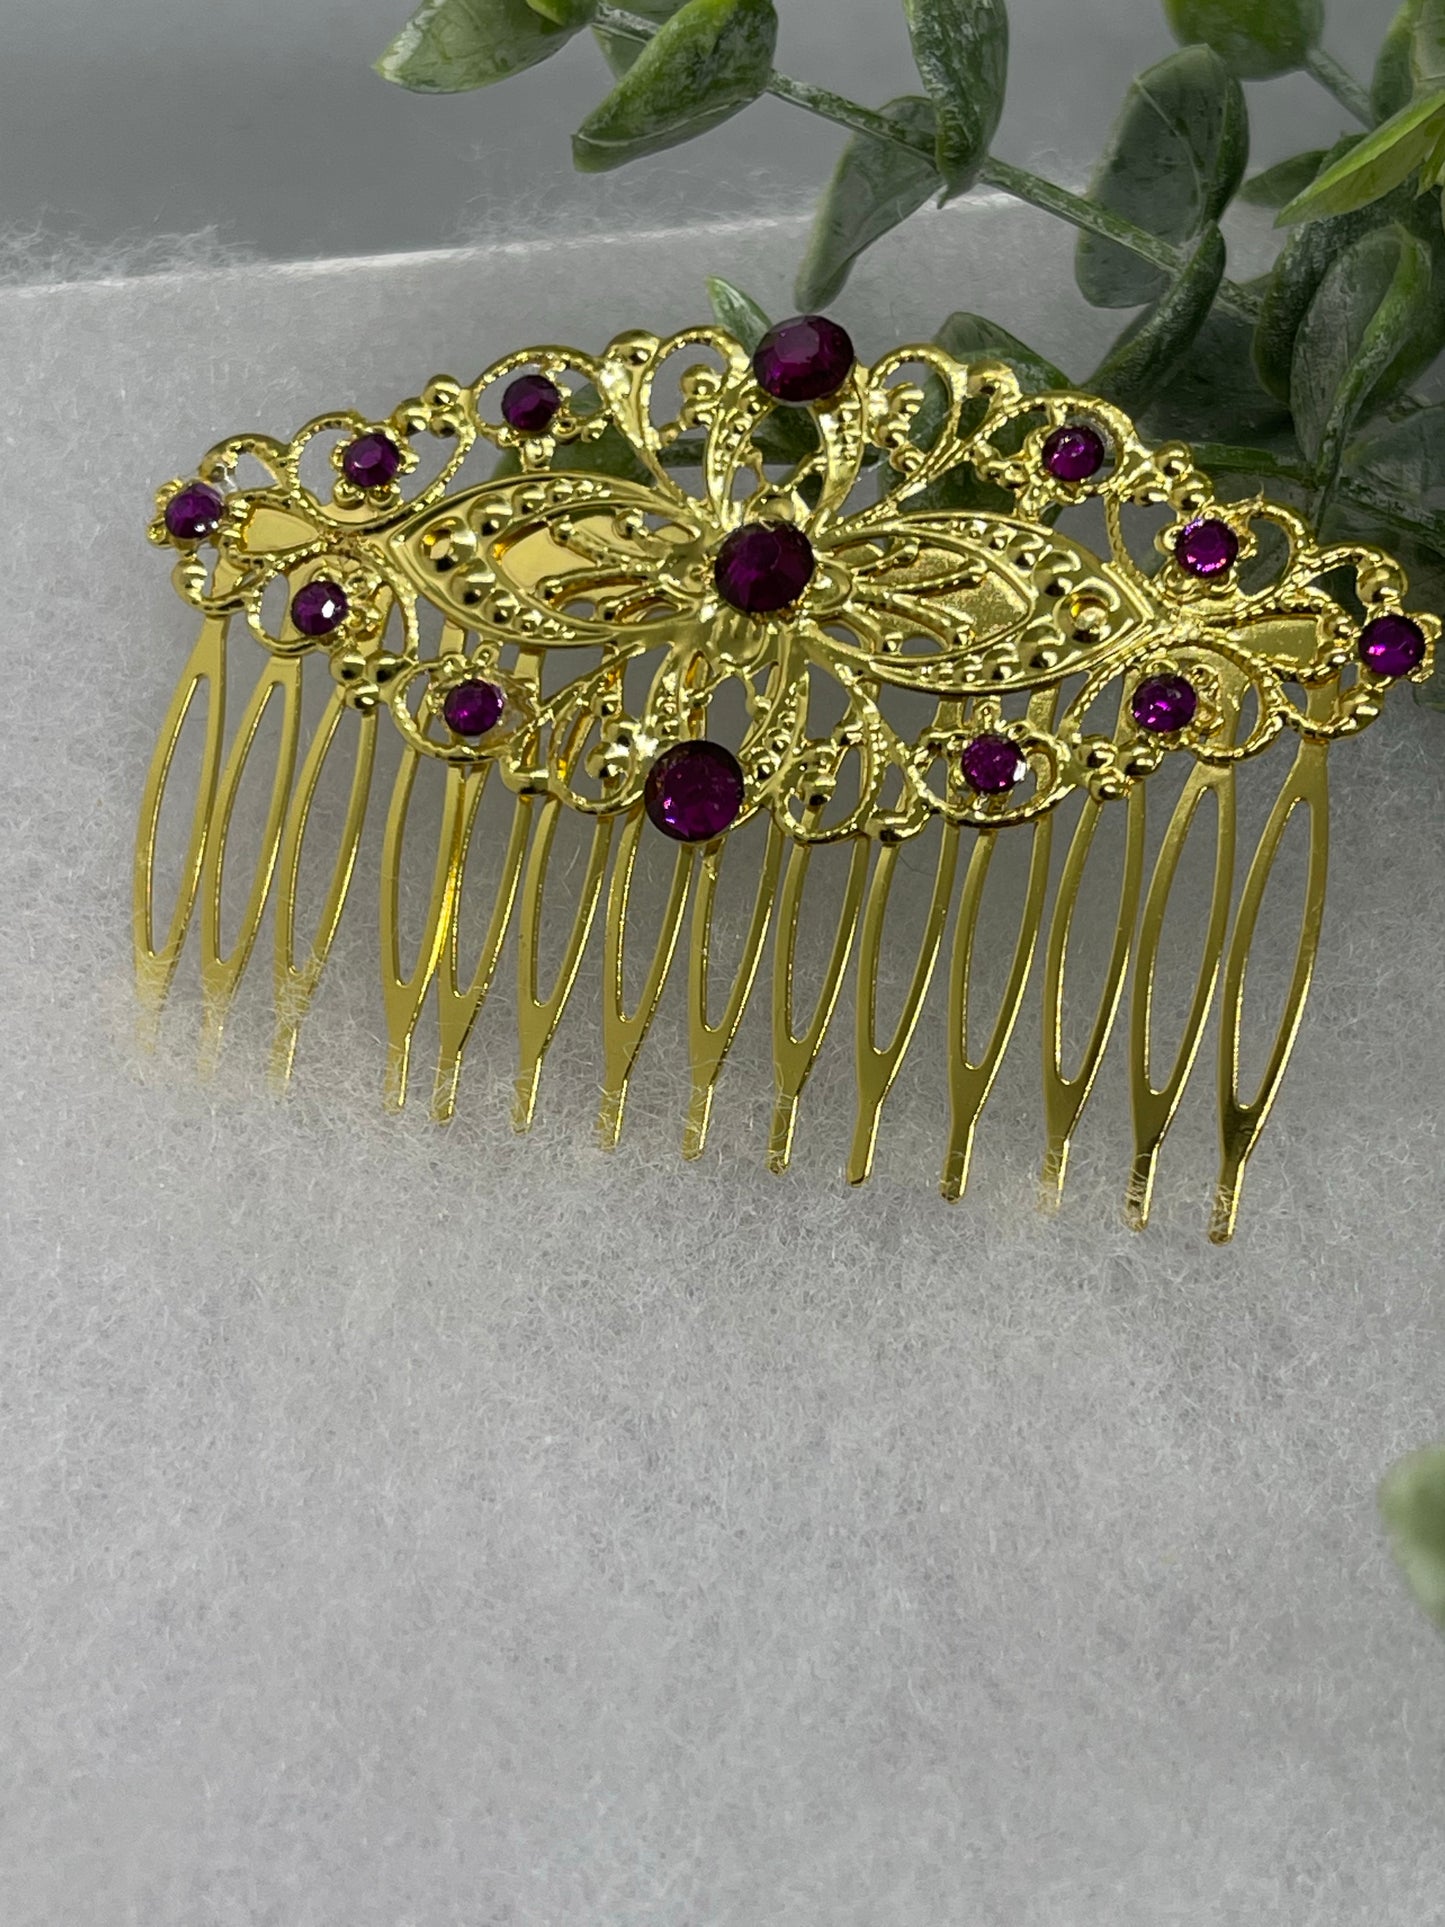 Purple  crystal vintage style silver tone side comb hair accessory accessories gift birthday event formal bridesmaid wedding 3.5” gold  tone side comb